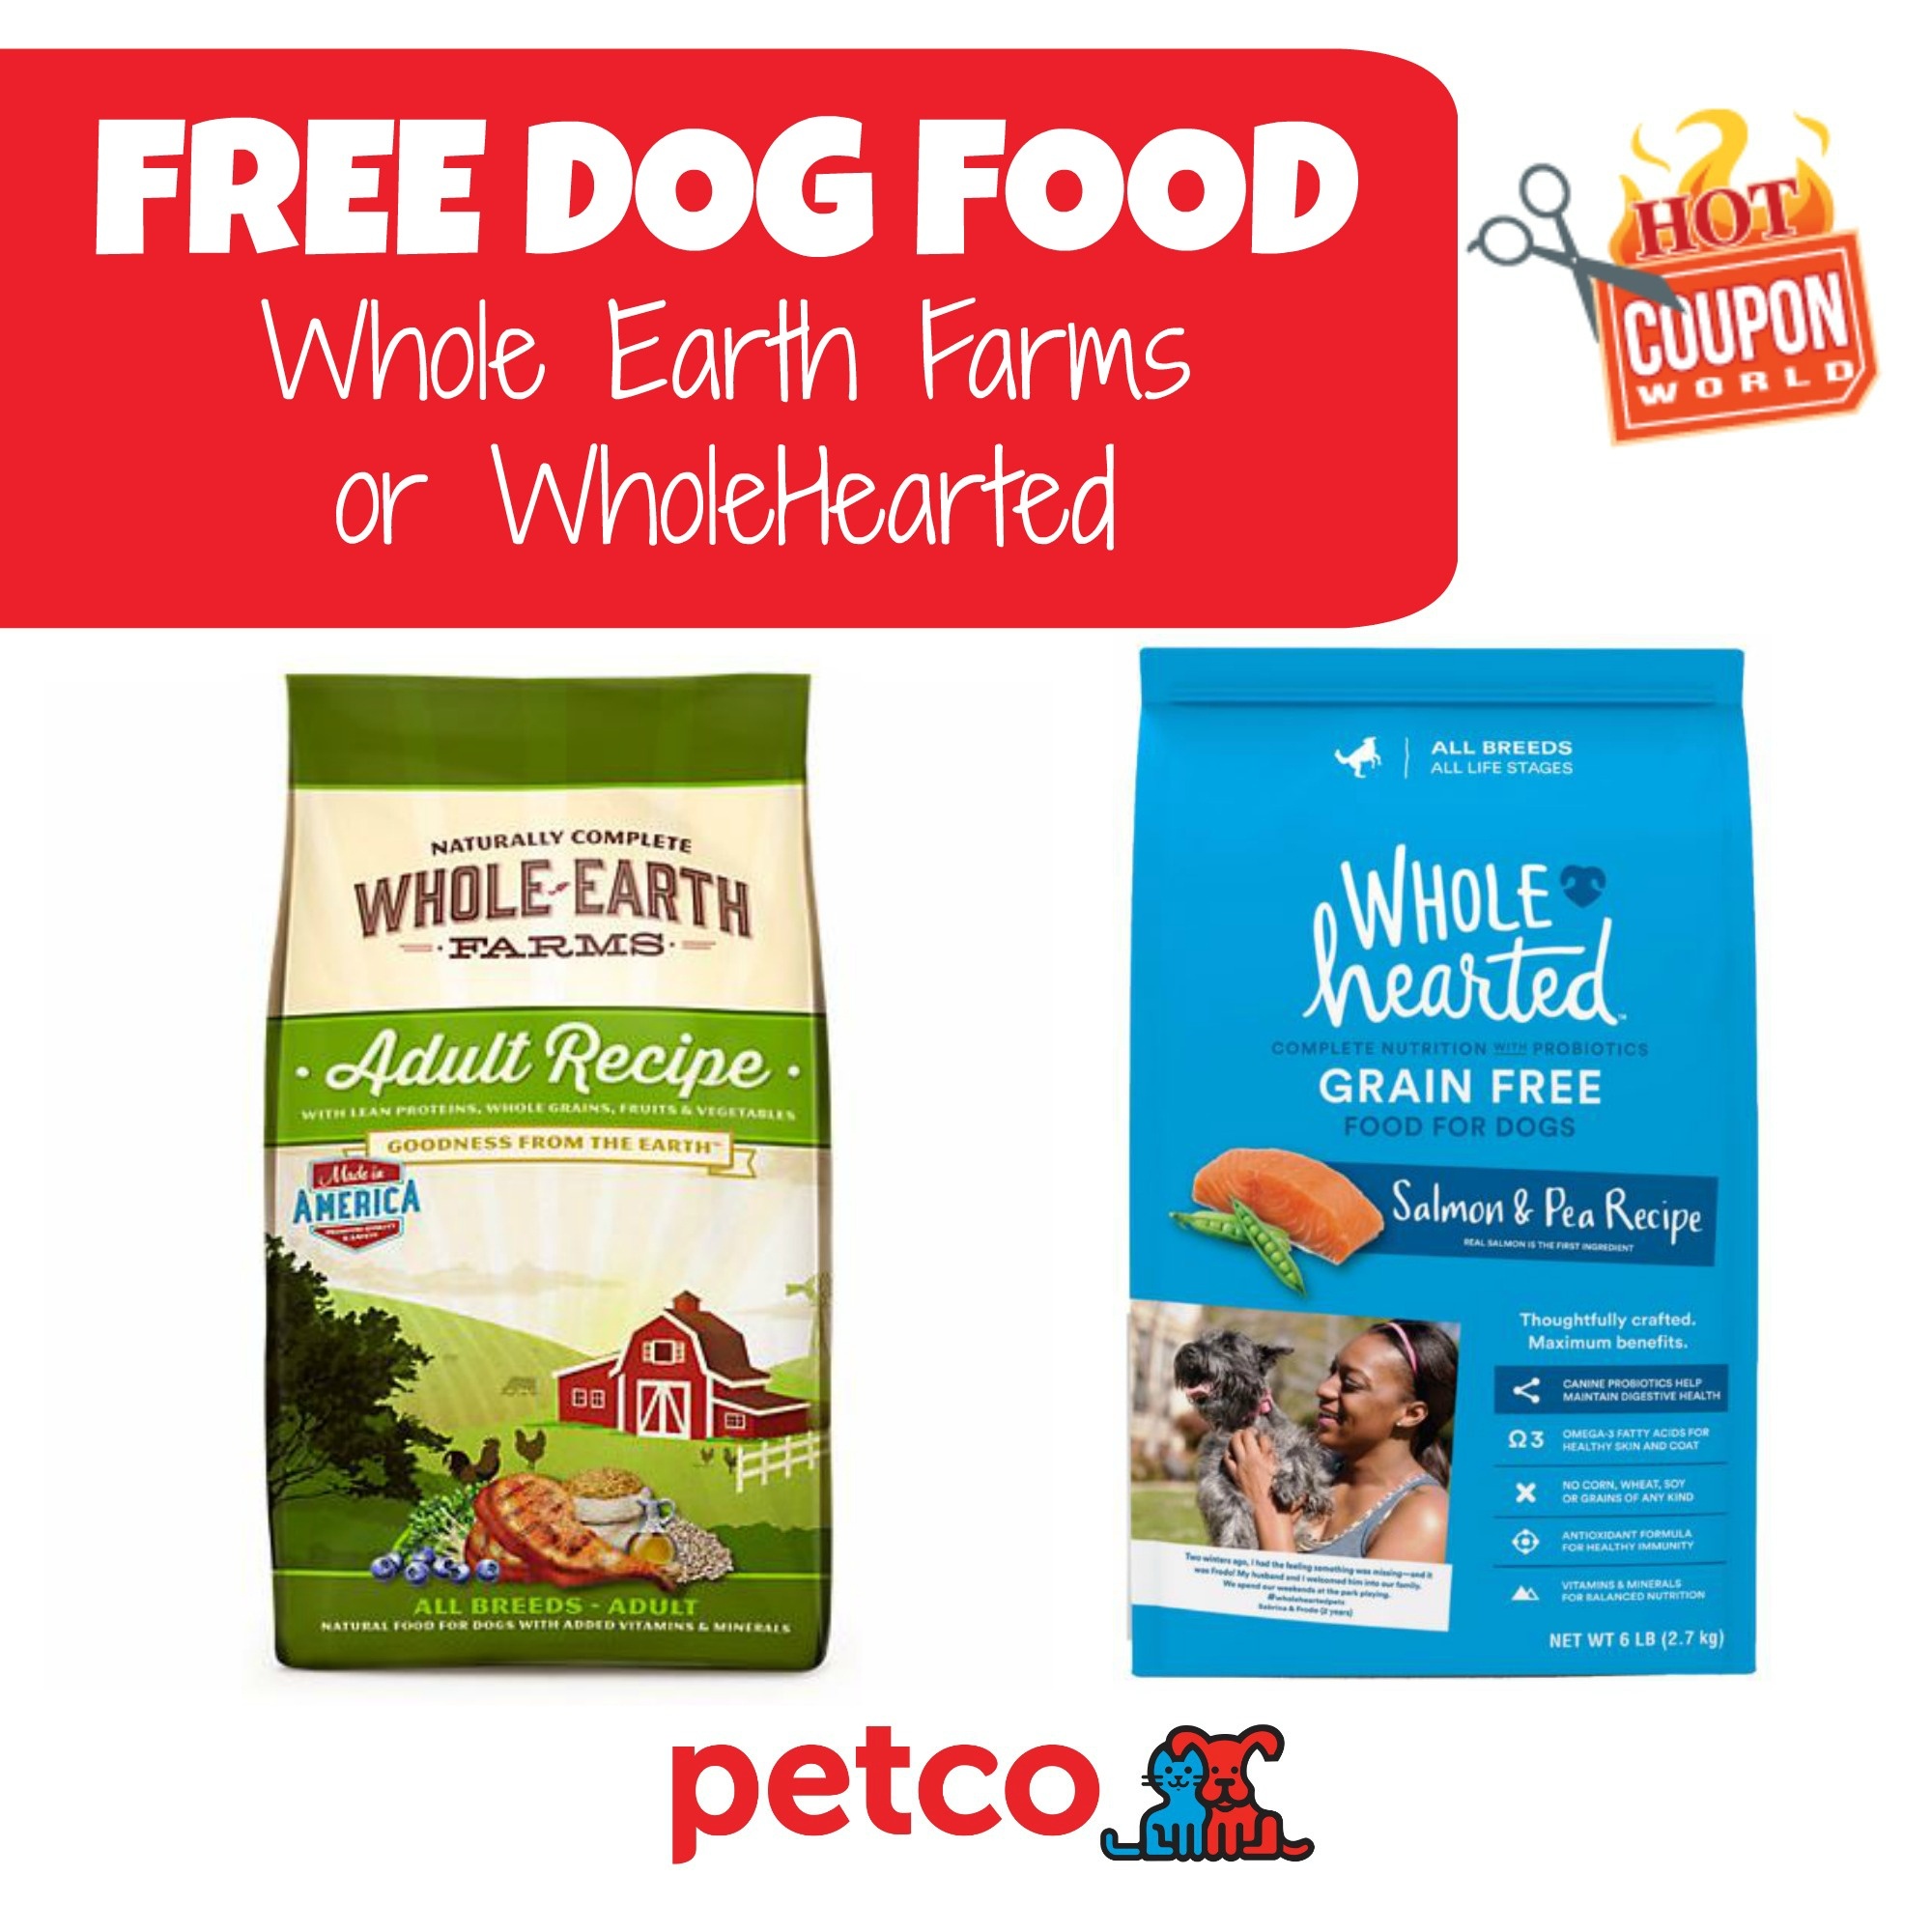 Petco: Free Wholehearted Or Whole Earth Farms Dog Food Coupon Deal - Free Printable Dog Food Coupons